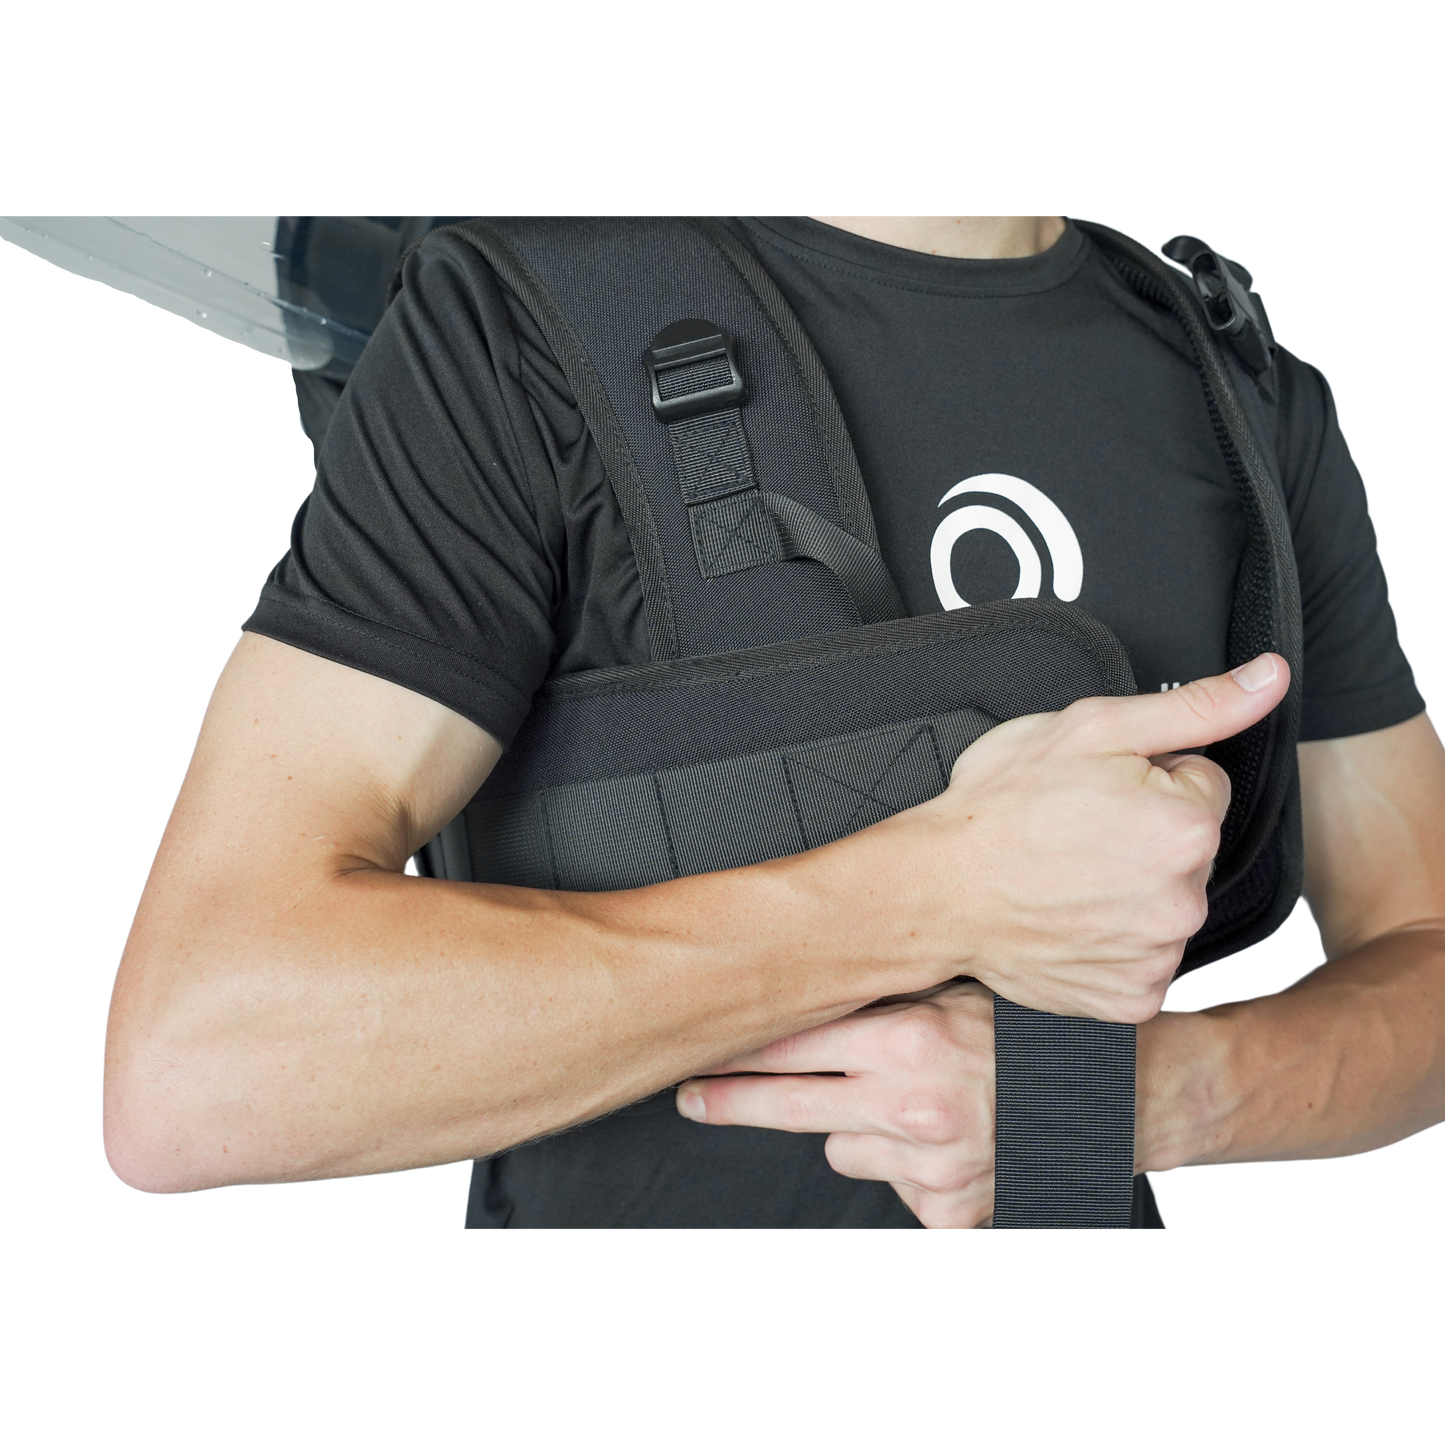 Hydrovest 2.0 - Now available!